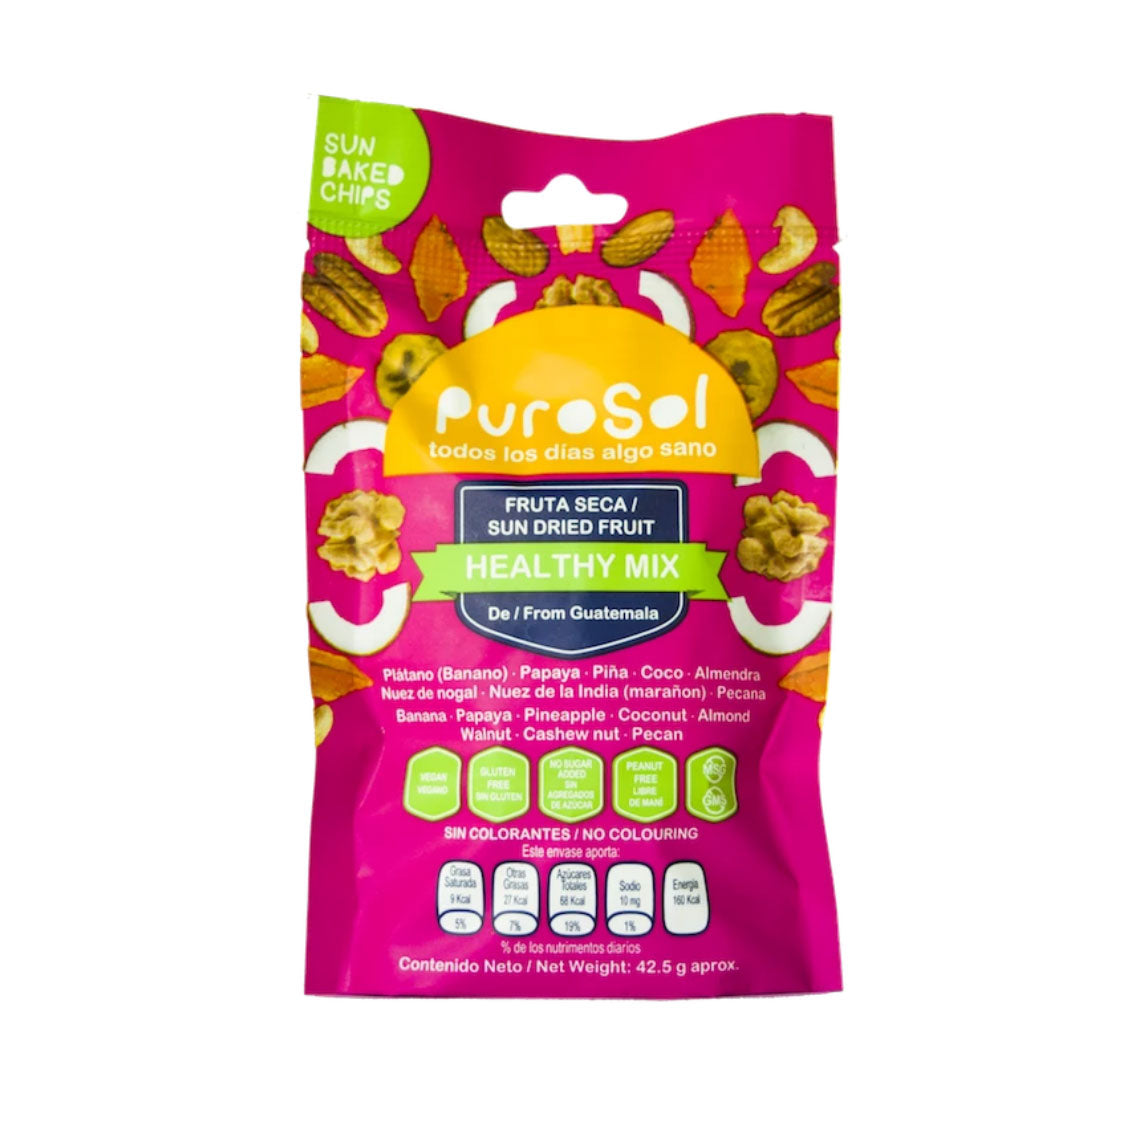 Snack Pack Mix (425 gr.) 10 units per box by PuroSol-healthy snacks sun-dried in Guatemala, dehydrated fruits and herbs for all of your culinary creations